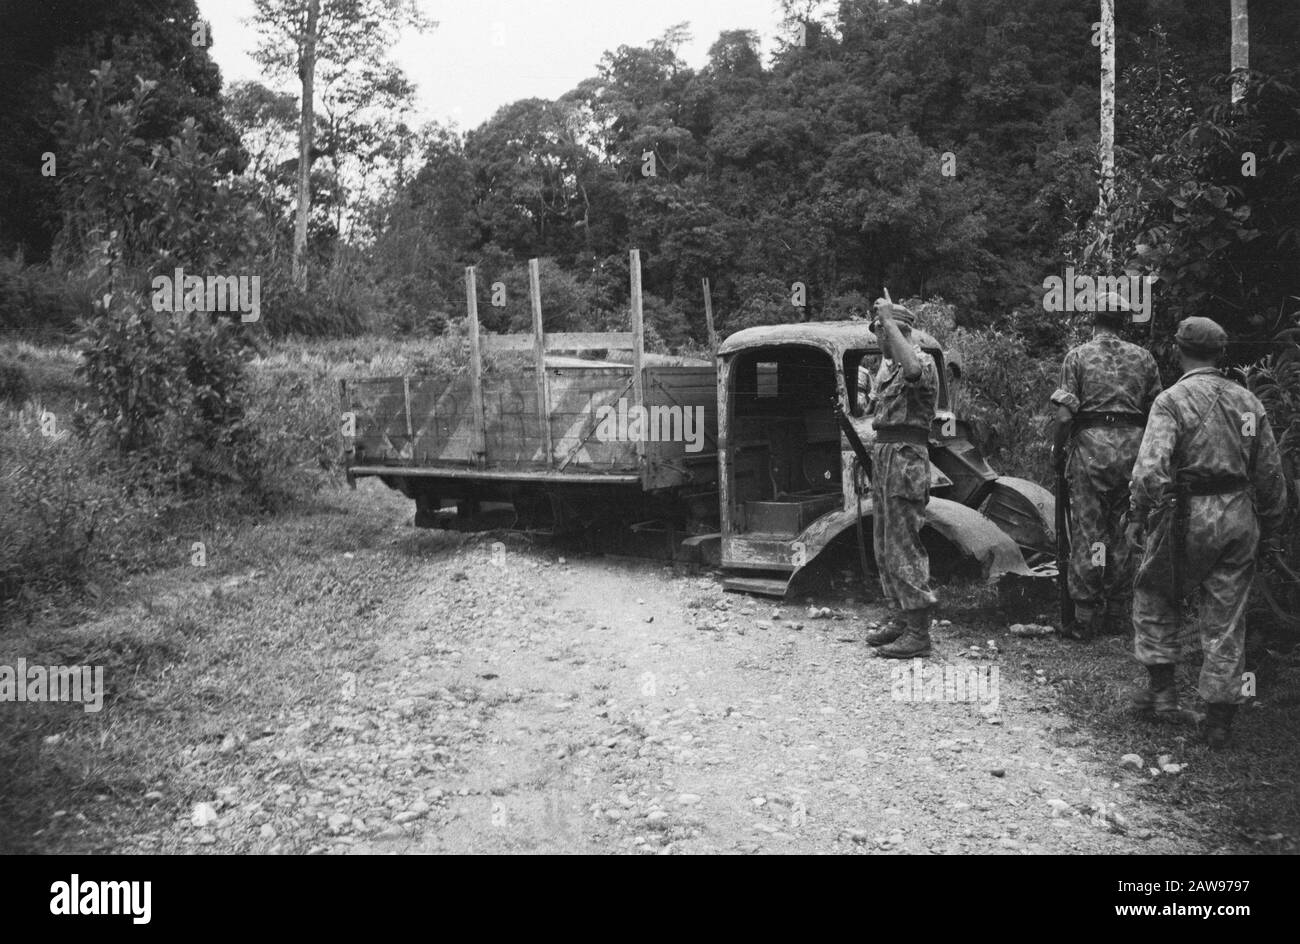 Action Kota Padang  Kotta Padan. Primitive roadblocks, such as remnants of old trucks, which quickly cleared his Date: July 1947 Location: Indonesia Dutch East Indies Stock Photo